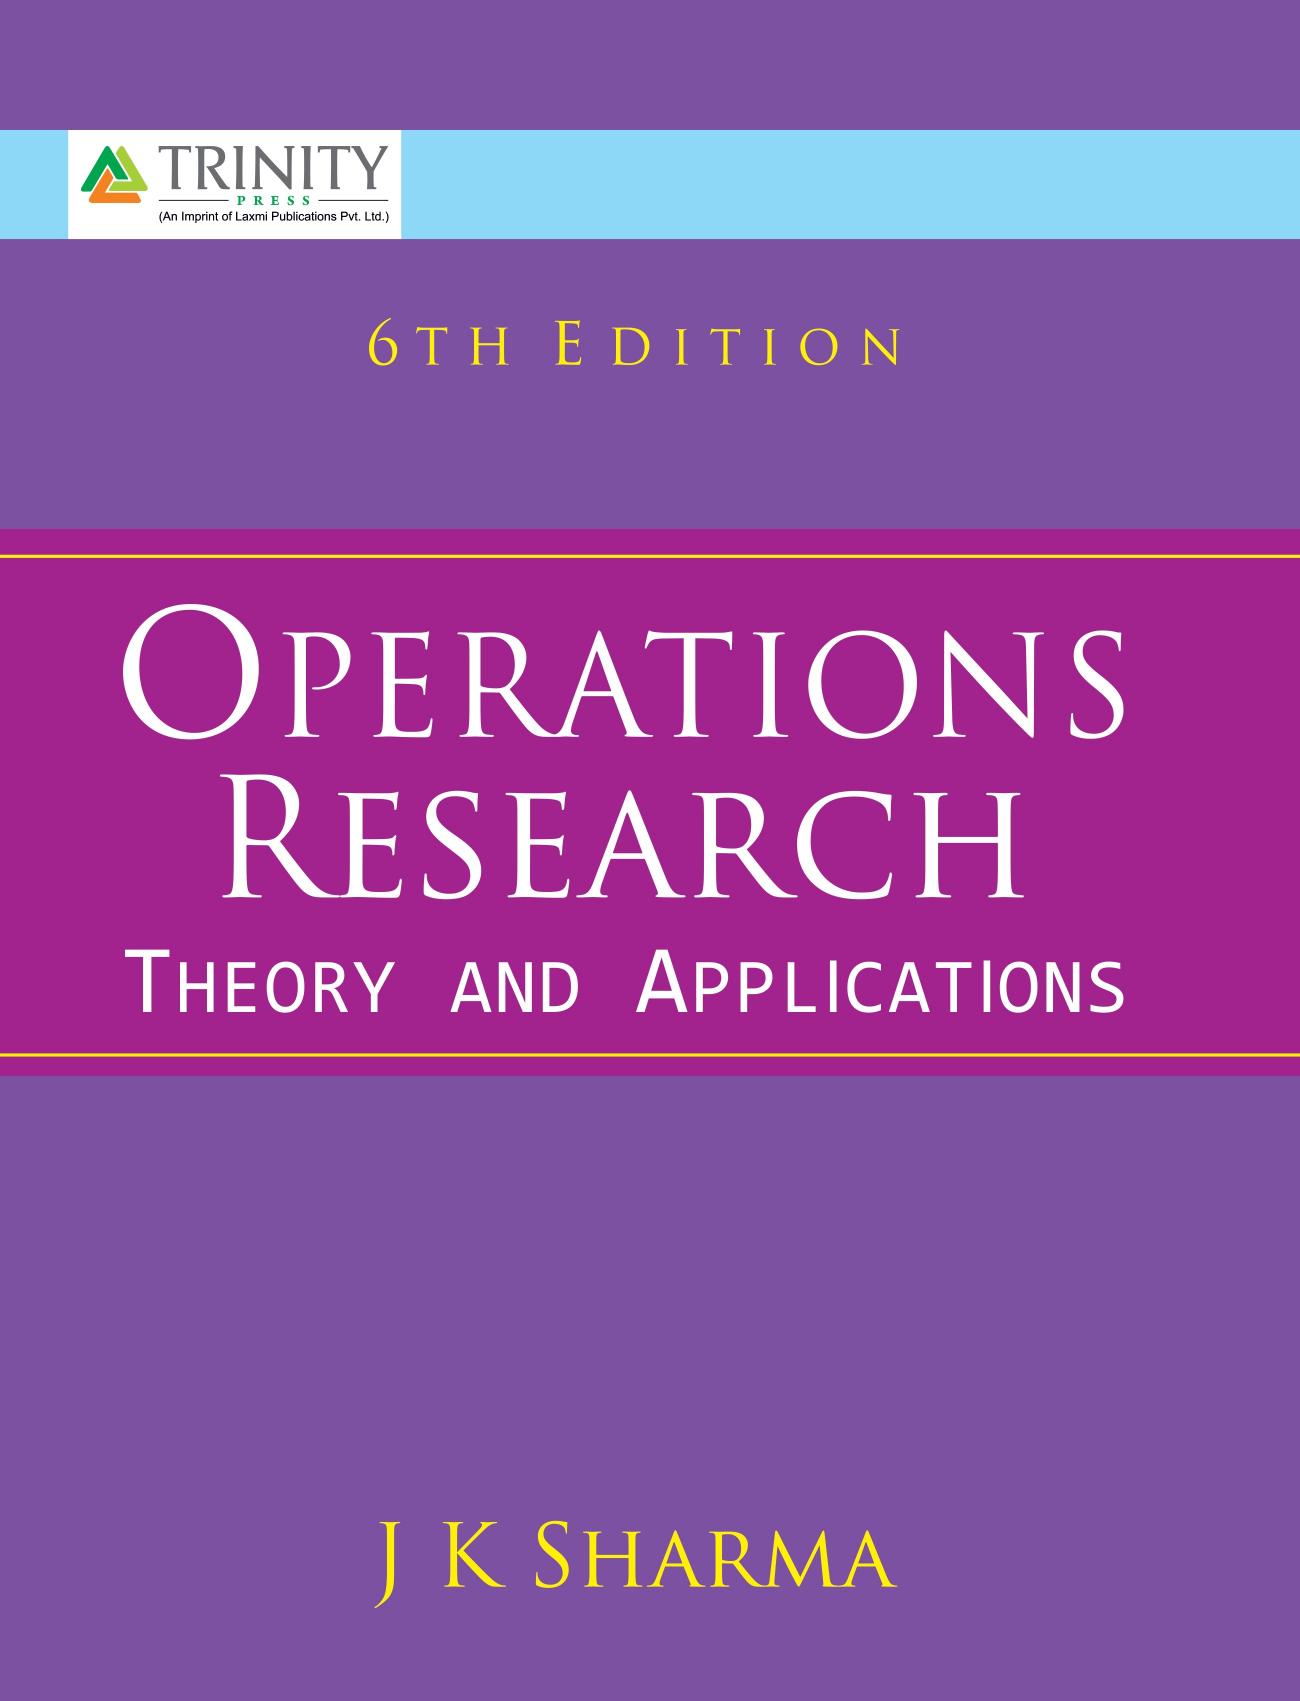 Operations Research: Theory and Applications